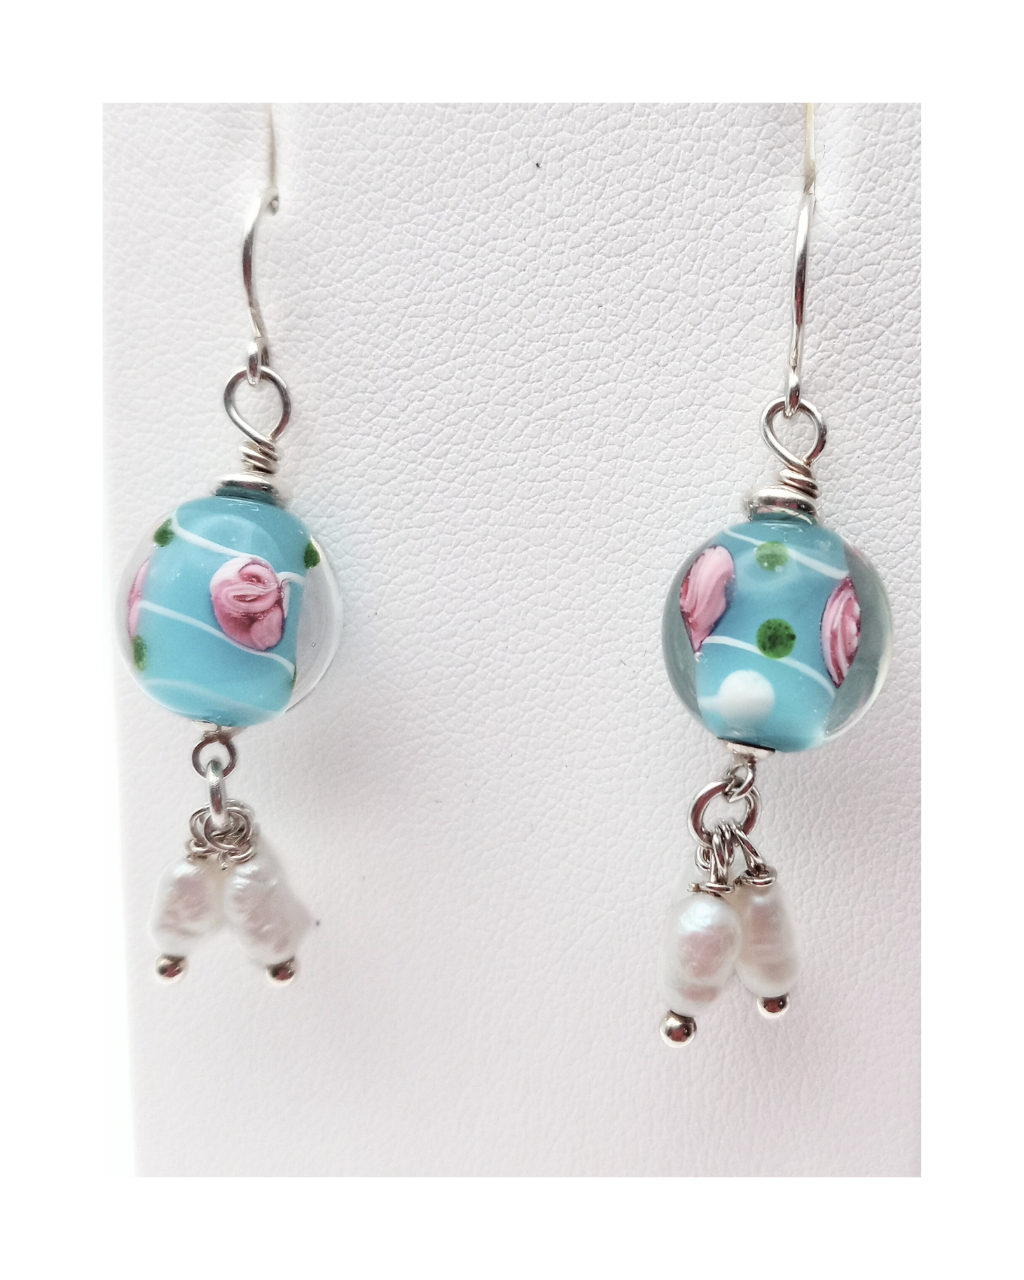 Sterling 925 Lampwork Blue and Pink Flower Glass Bead with 3 White Freshwater Pearl Dangle Drops Earrings. ONE ONLY.